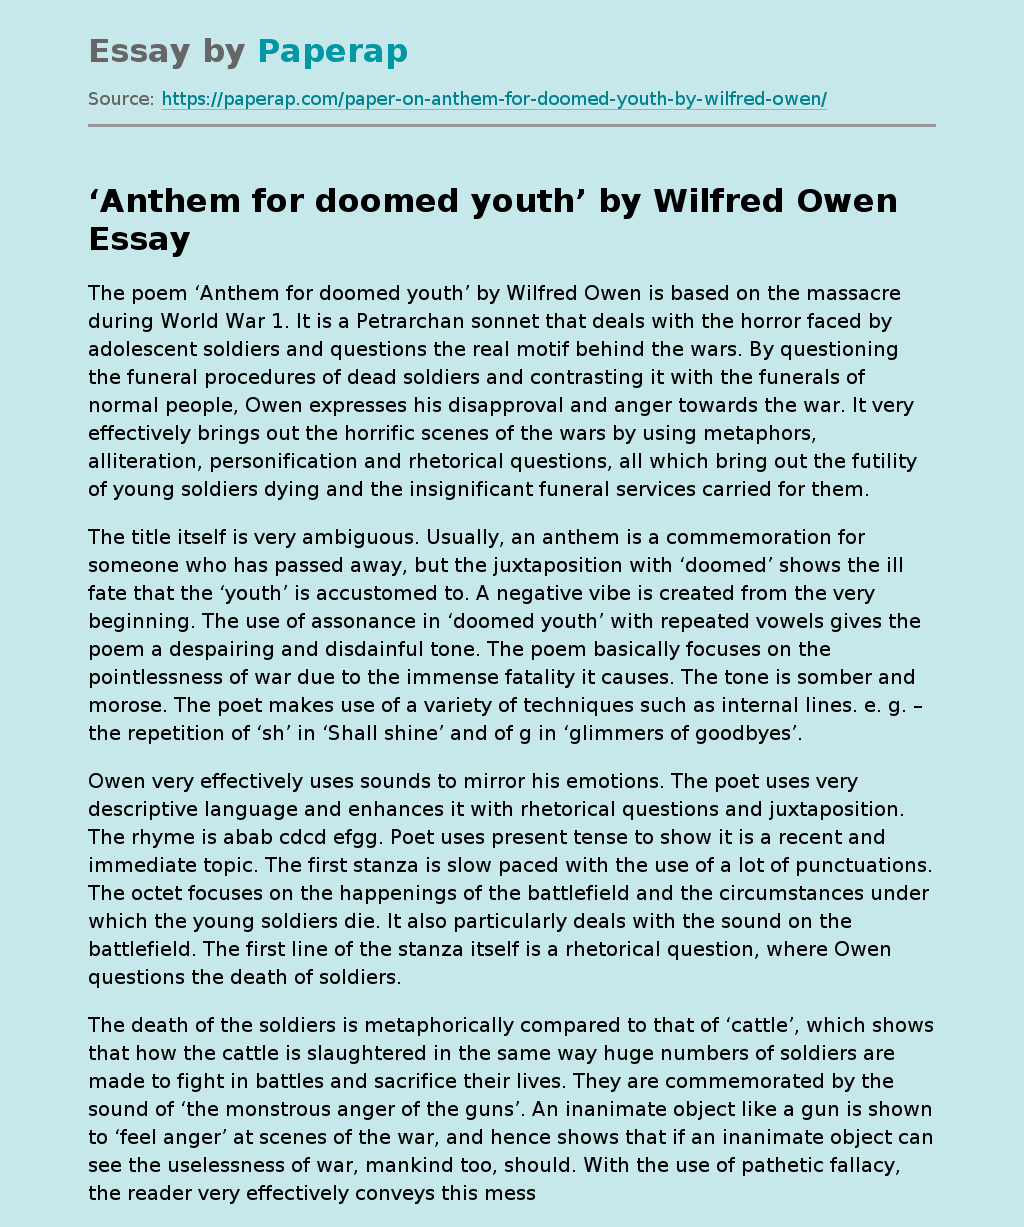 ‘Anthem for doomed youth’ by Wilfred Owen